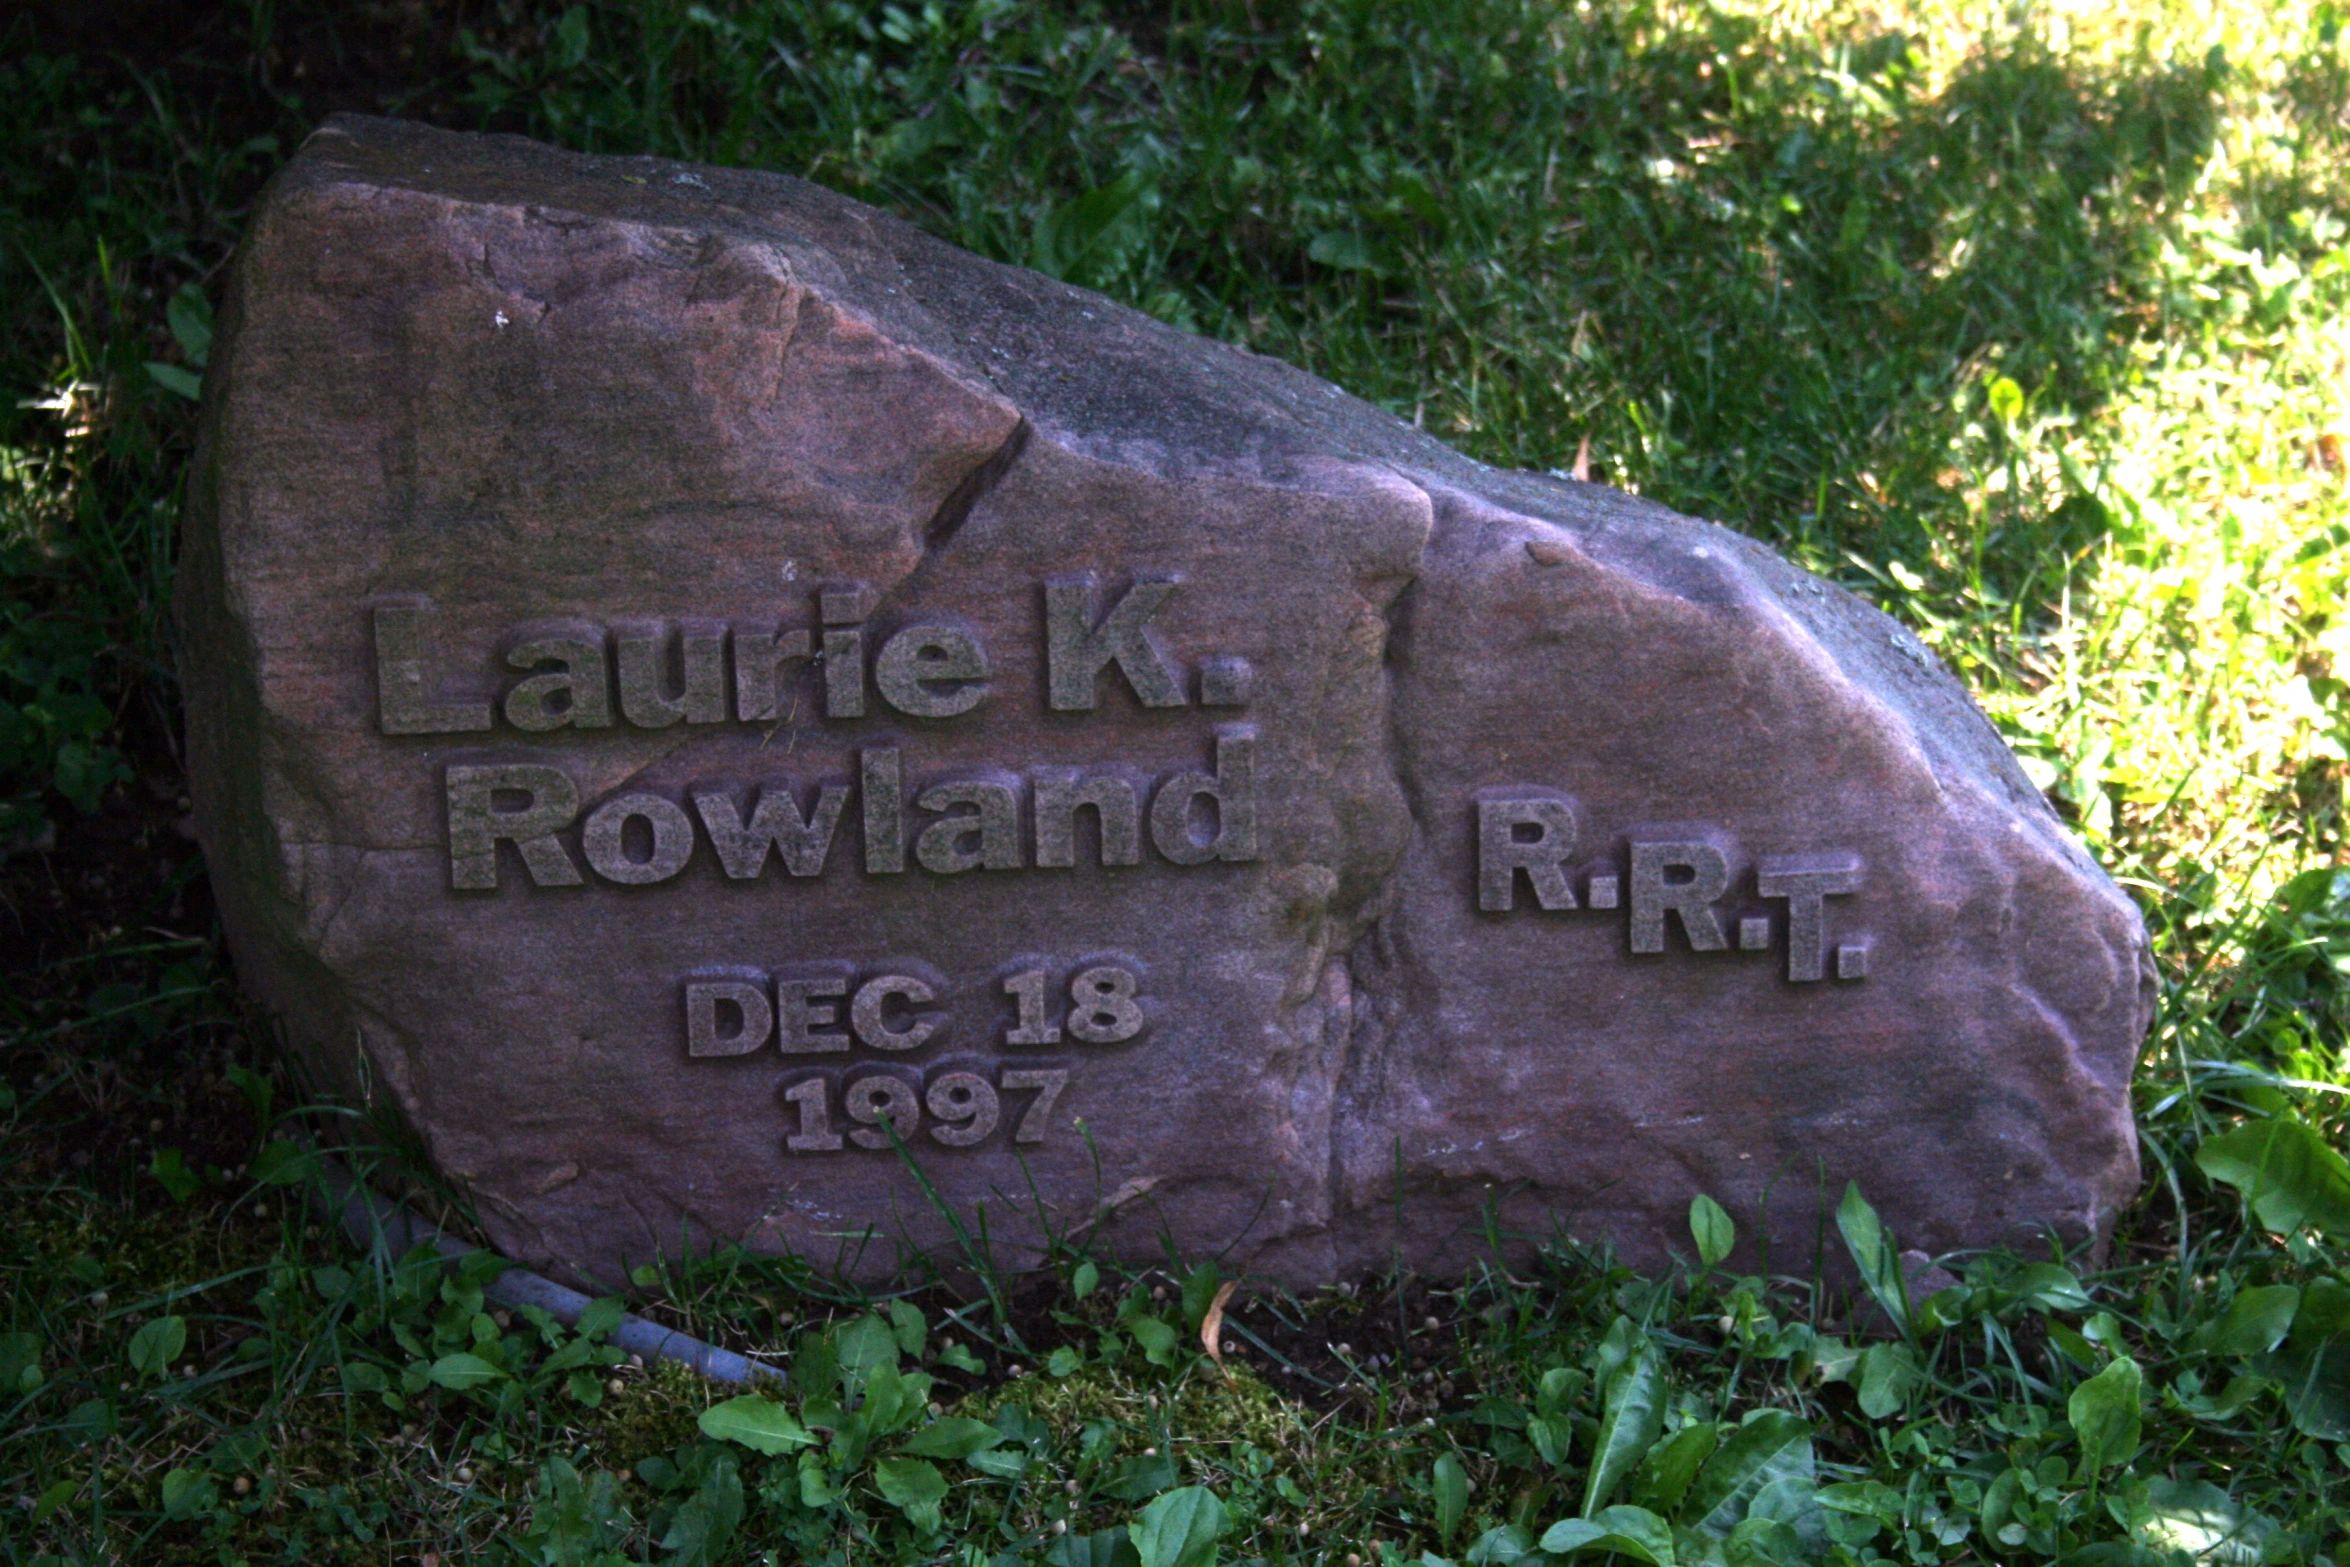 the carved name stone sits in front of the grass